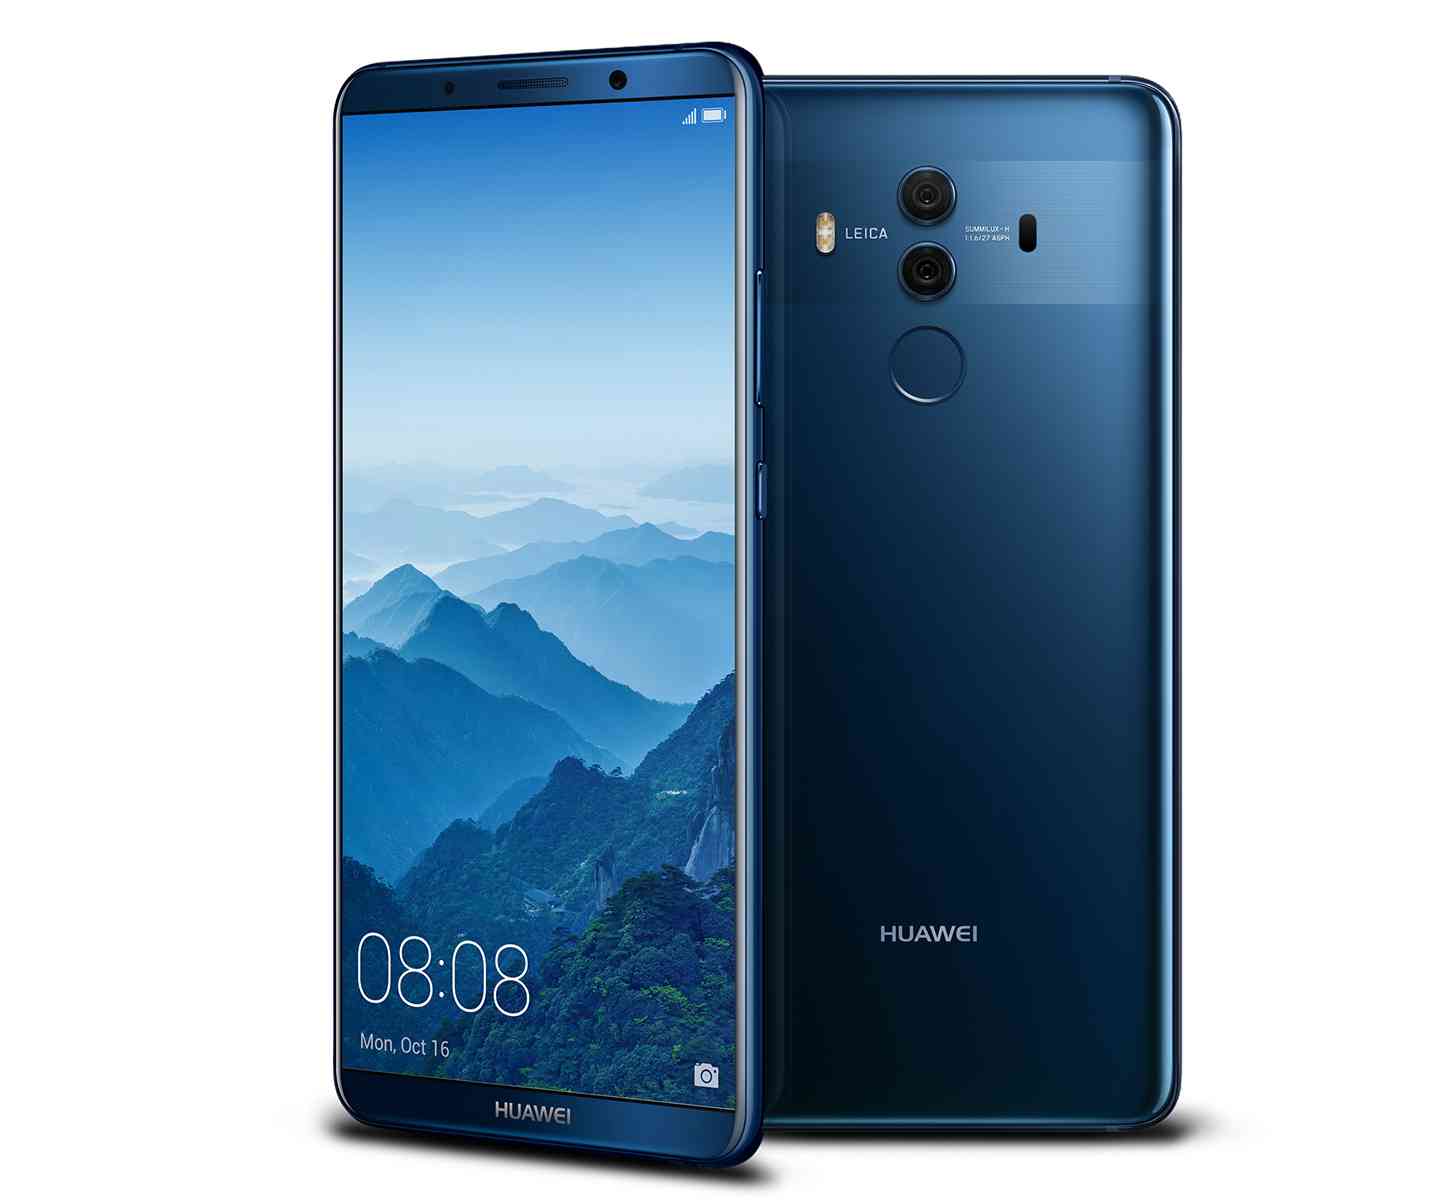 Huawei Mate 10 Pro official